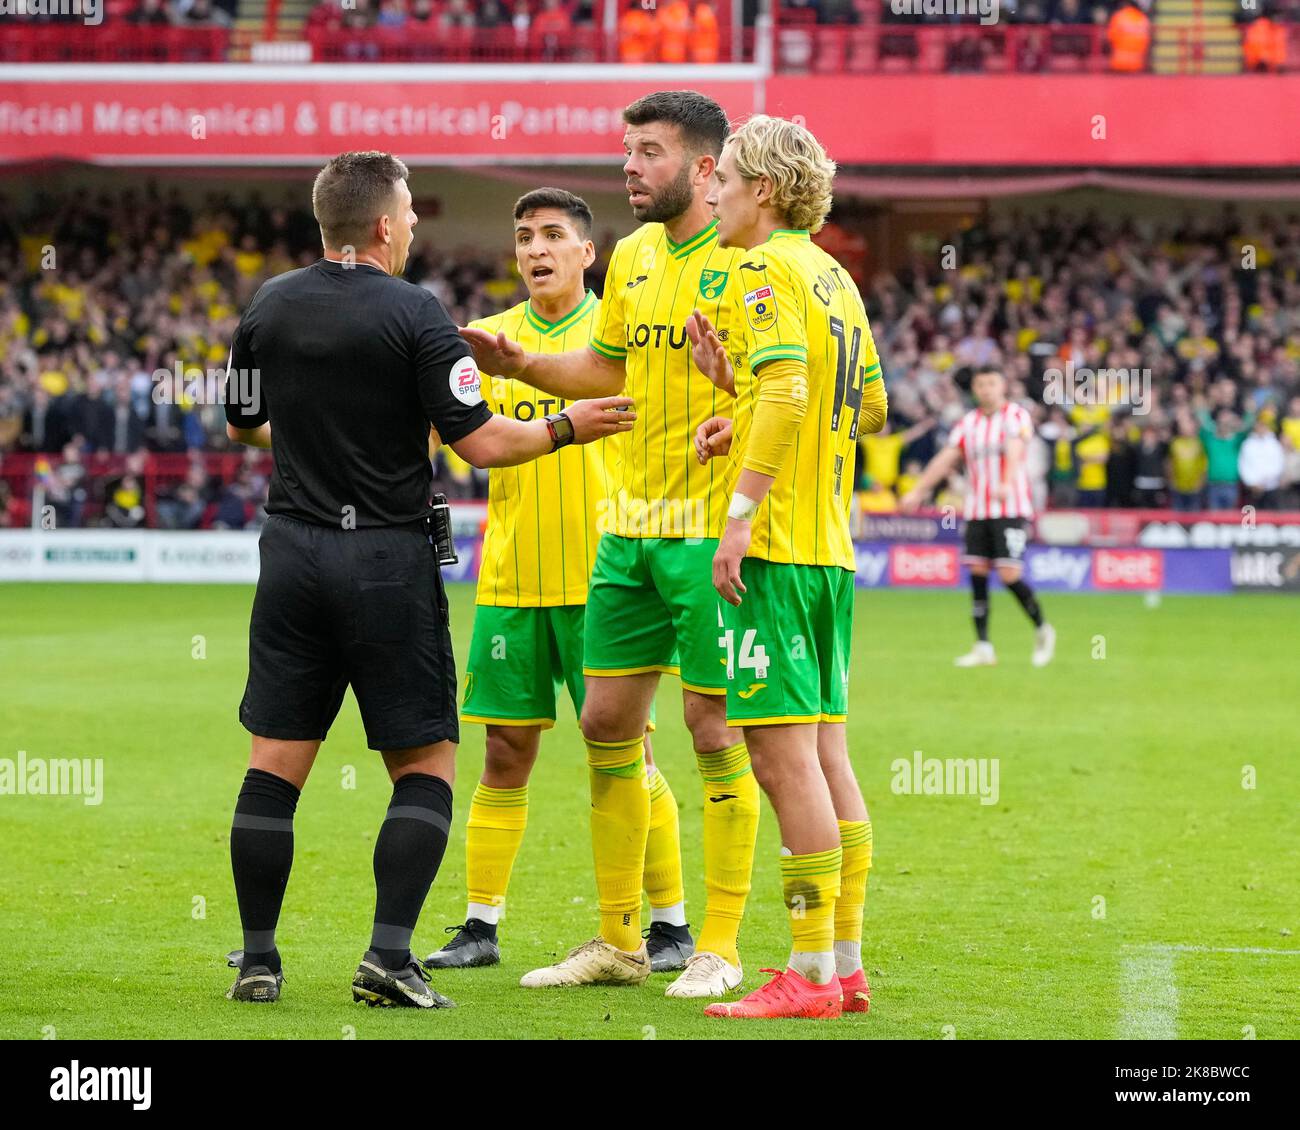 Grant Hanley #5 of Norwich City appeals to Referee Josh Smith during the Sky Bet Championship match Sheffield United vs Norwich City at Bramall Lane, Sheffield, United Kingdom, 22nd October 2022  (Photo by Steve Flynn/News Images) Stock Photo